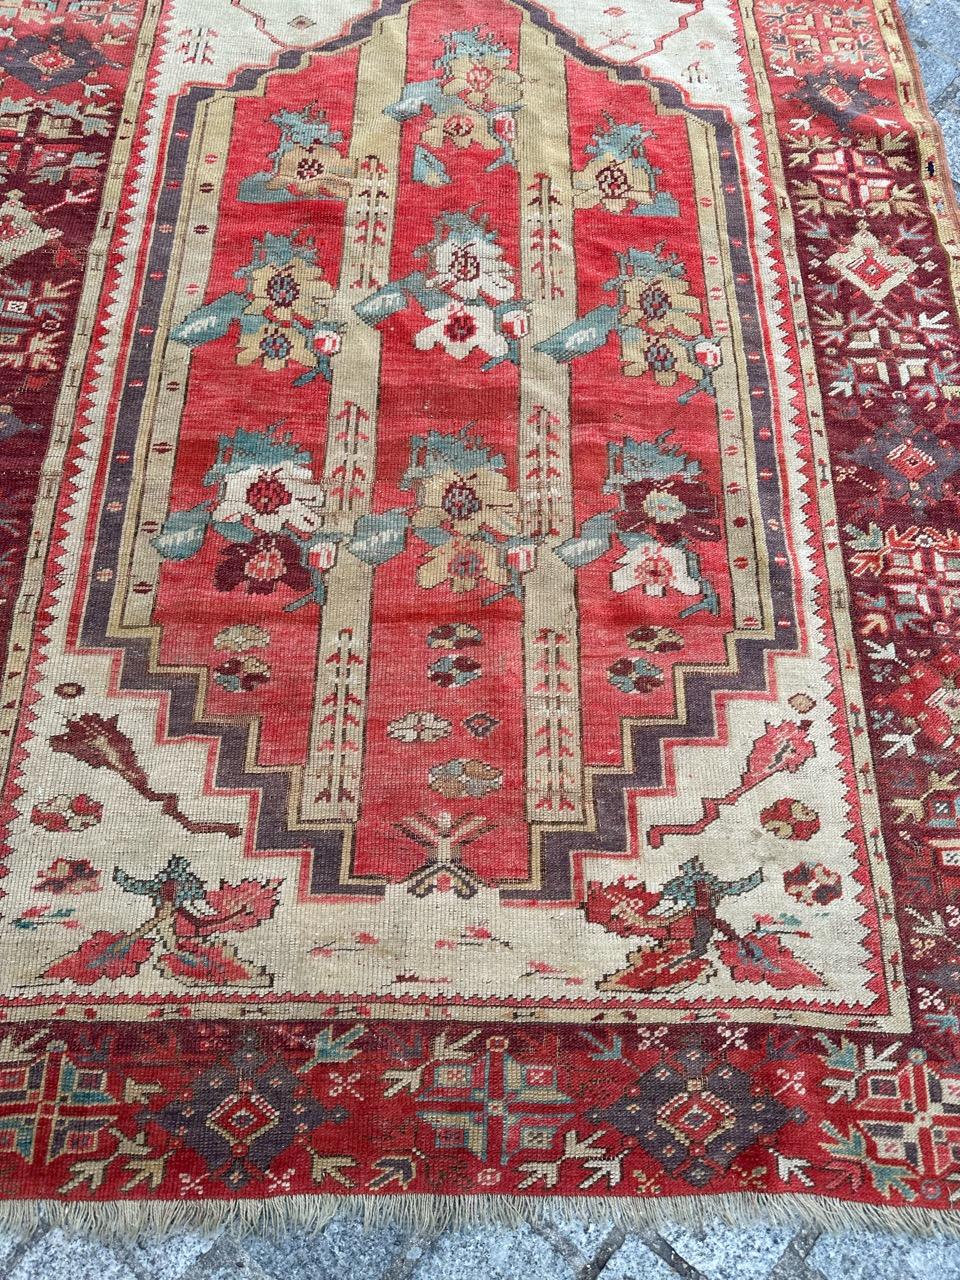 Exquisite Antique Turkish Rug from the Early 19th Century!

Discover the timeless beauty of this stunning Turkish rug, believed to date back to the early 19th century. Handcrafted with meticulous care, it features a captivating design in rich,